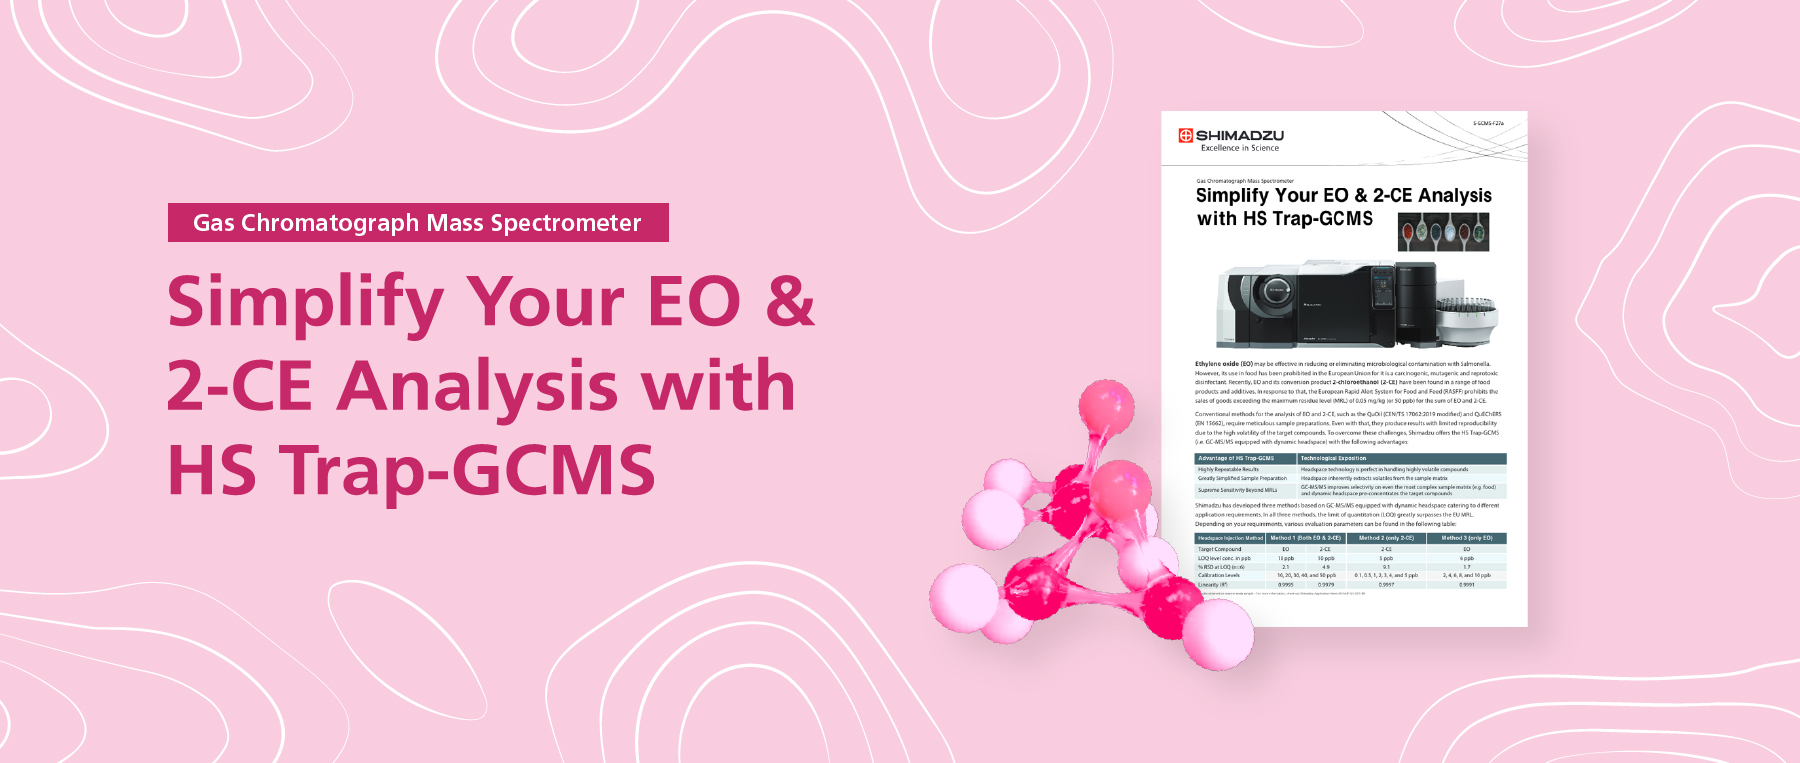 Simplify Your EO & 2-CE Analysis with HS Trap-GCMS